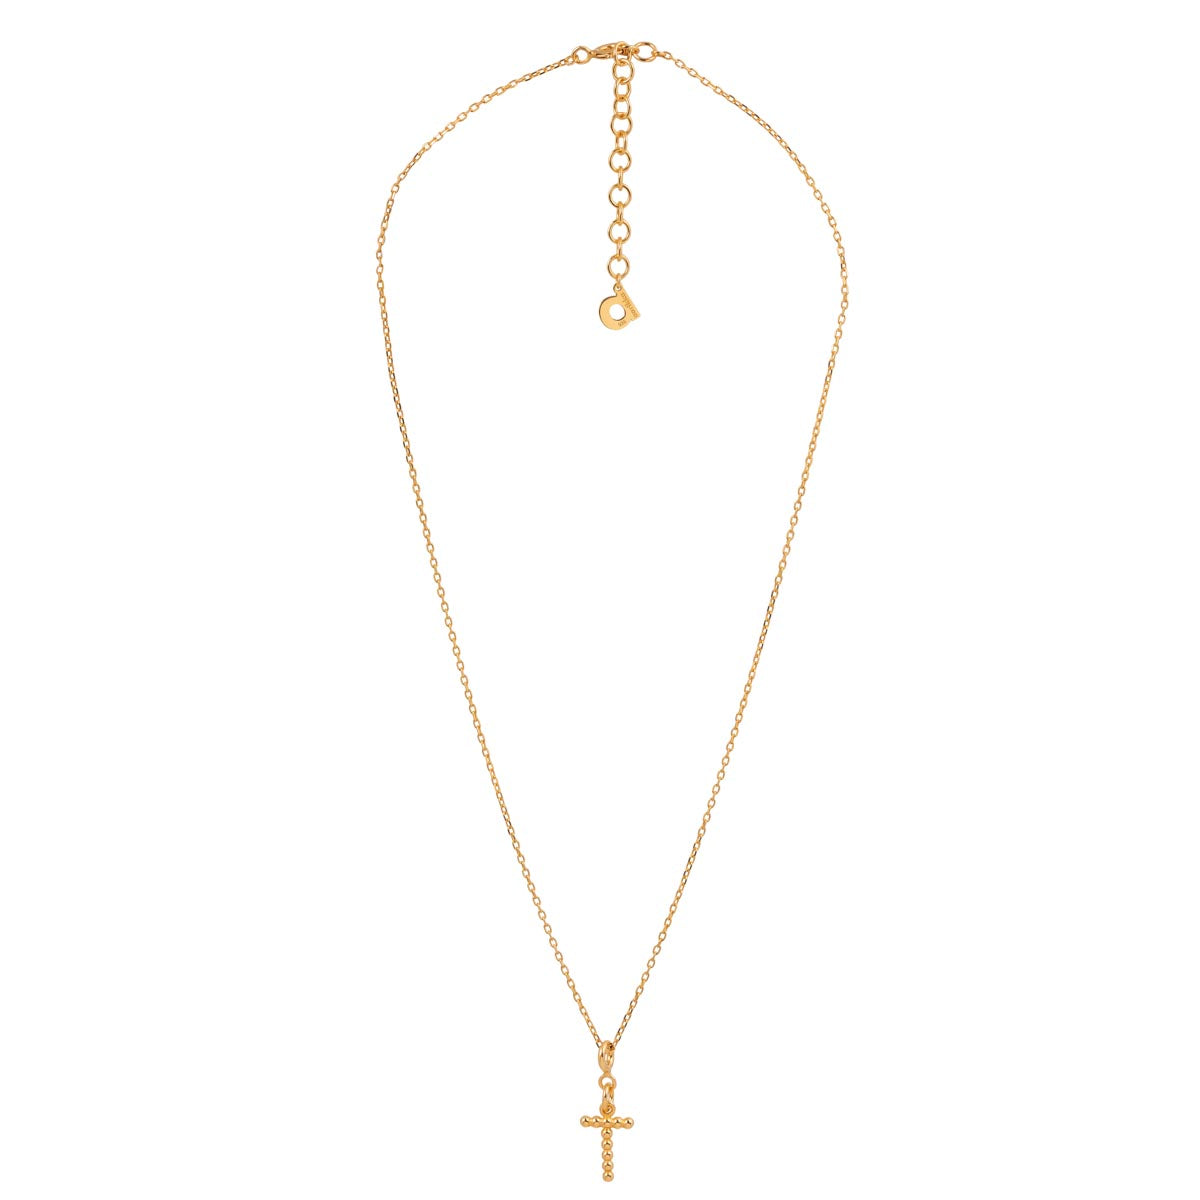 Yllätys Monogram Necklace T, gold-plated silver